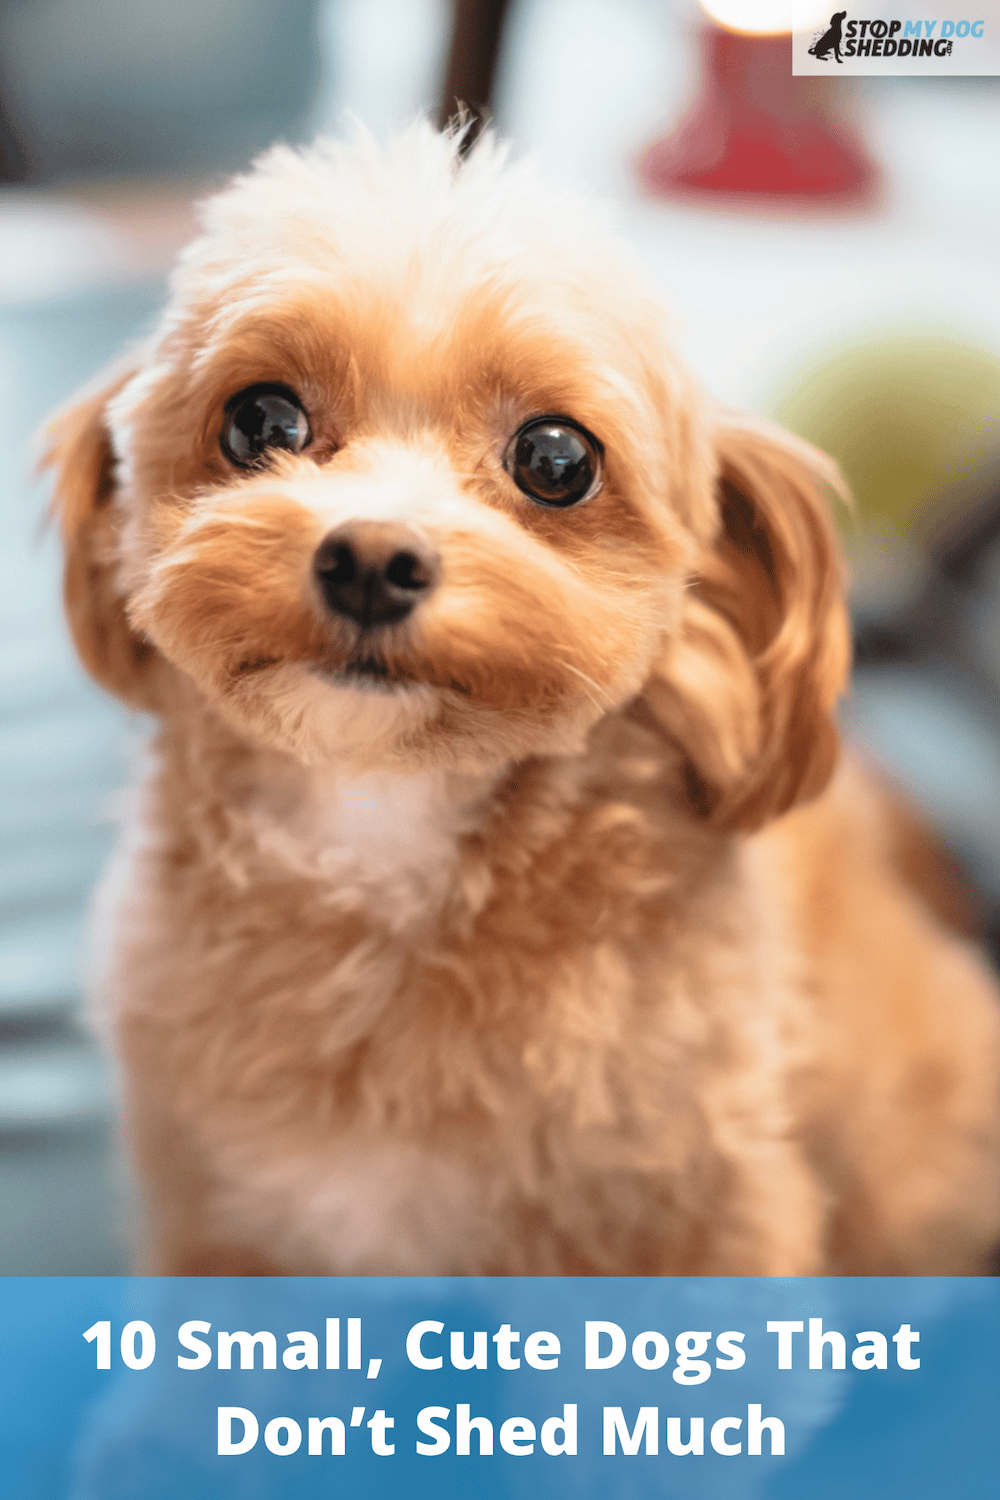 10 Small, Cute Dogs That Don’t Shed Much